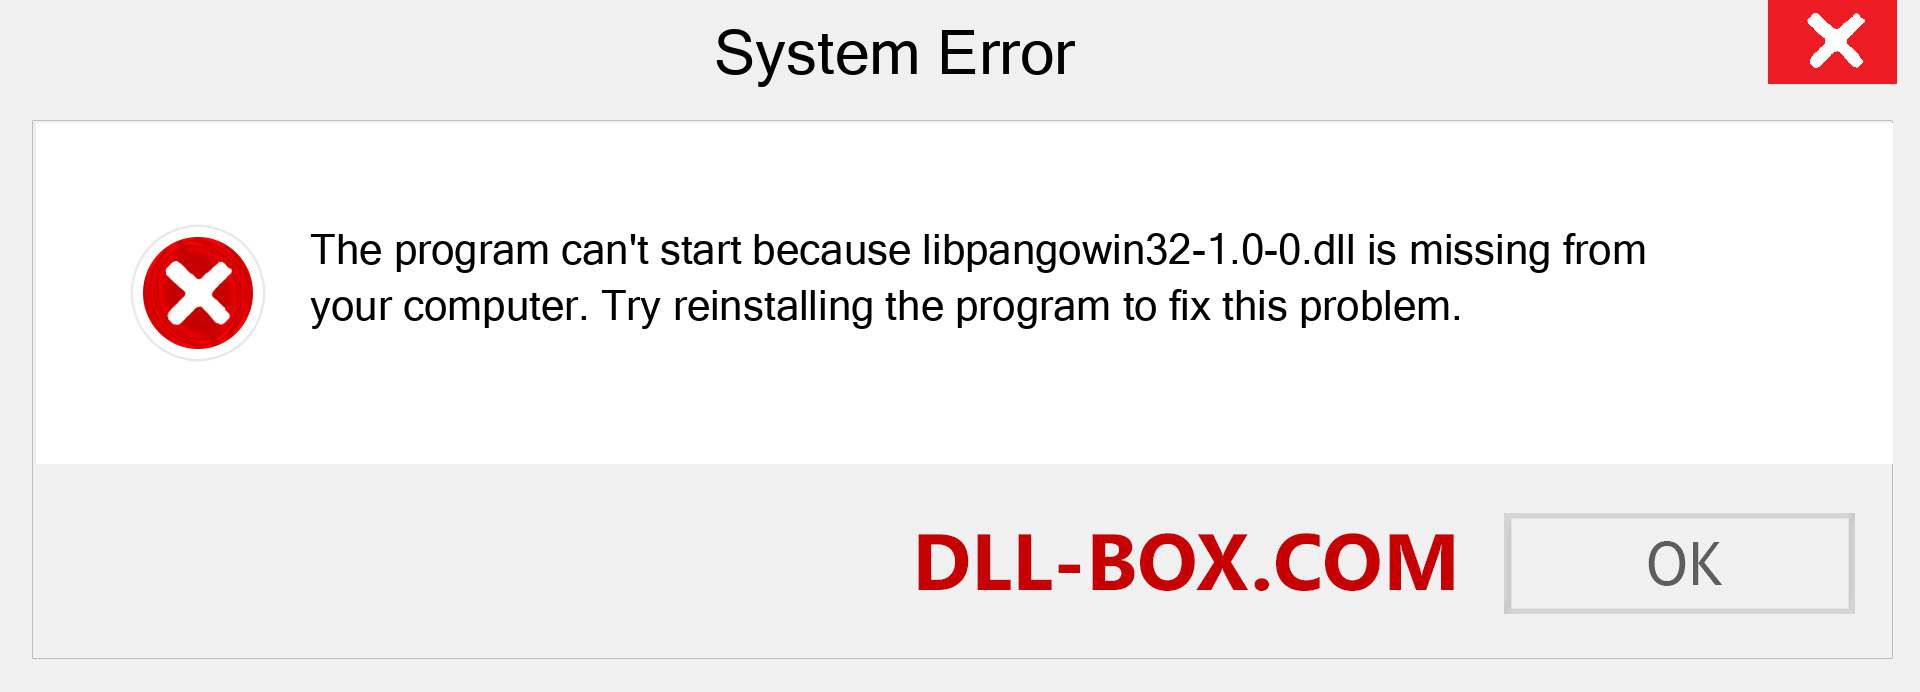  libpangowin32-1.0-0.dll file is missing?. Download for Windows 7, 8, 10 - Fix  libpangowin32-1.0-0 dll Missing Error on Windows, photos, images